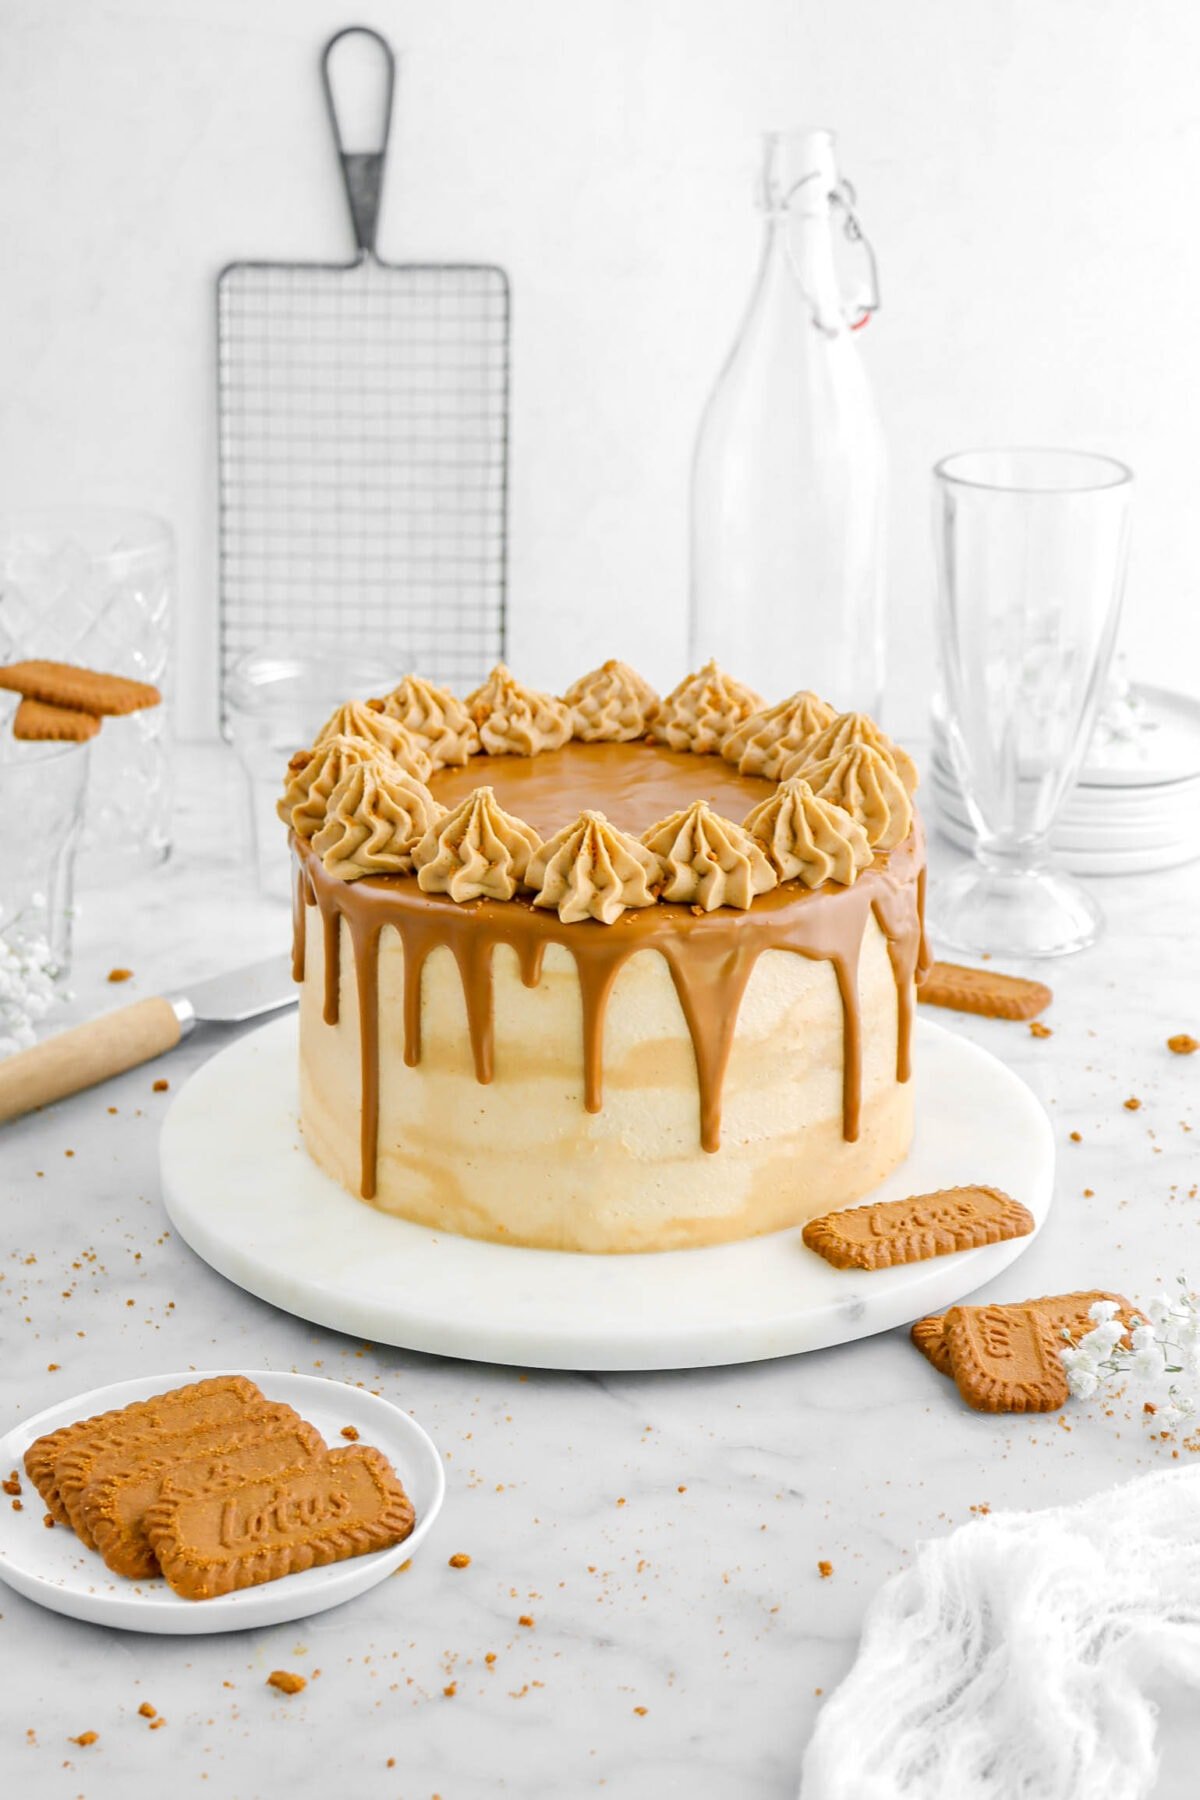 cookie butter cake with cookie butter drips and frosting piped on topm with cookies and cookie crumbs around, empty glasses, and wire tray behind cake on marble surface.